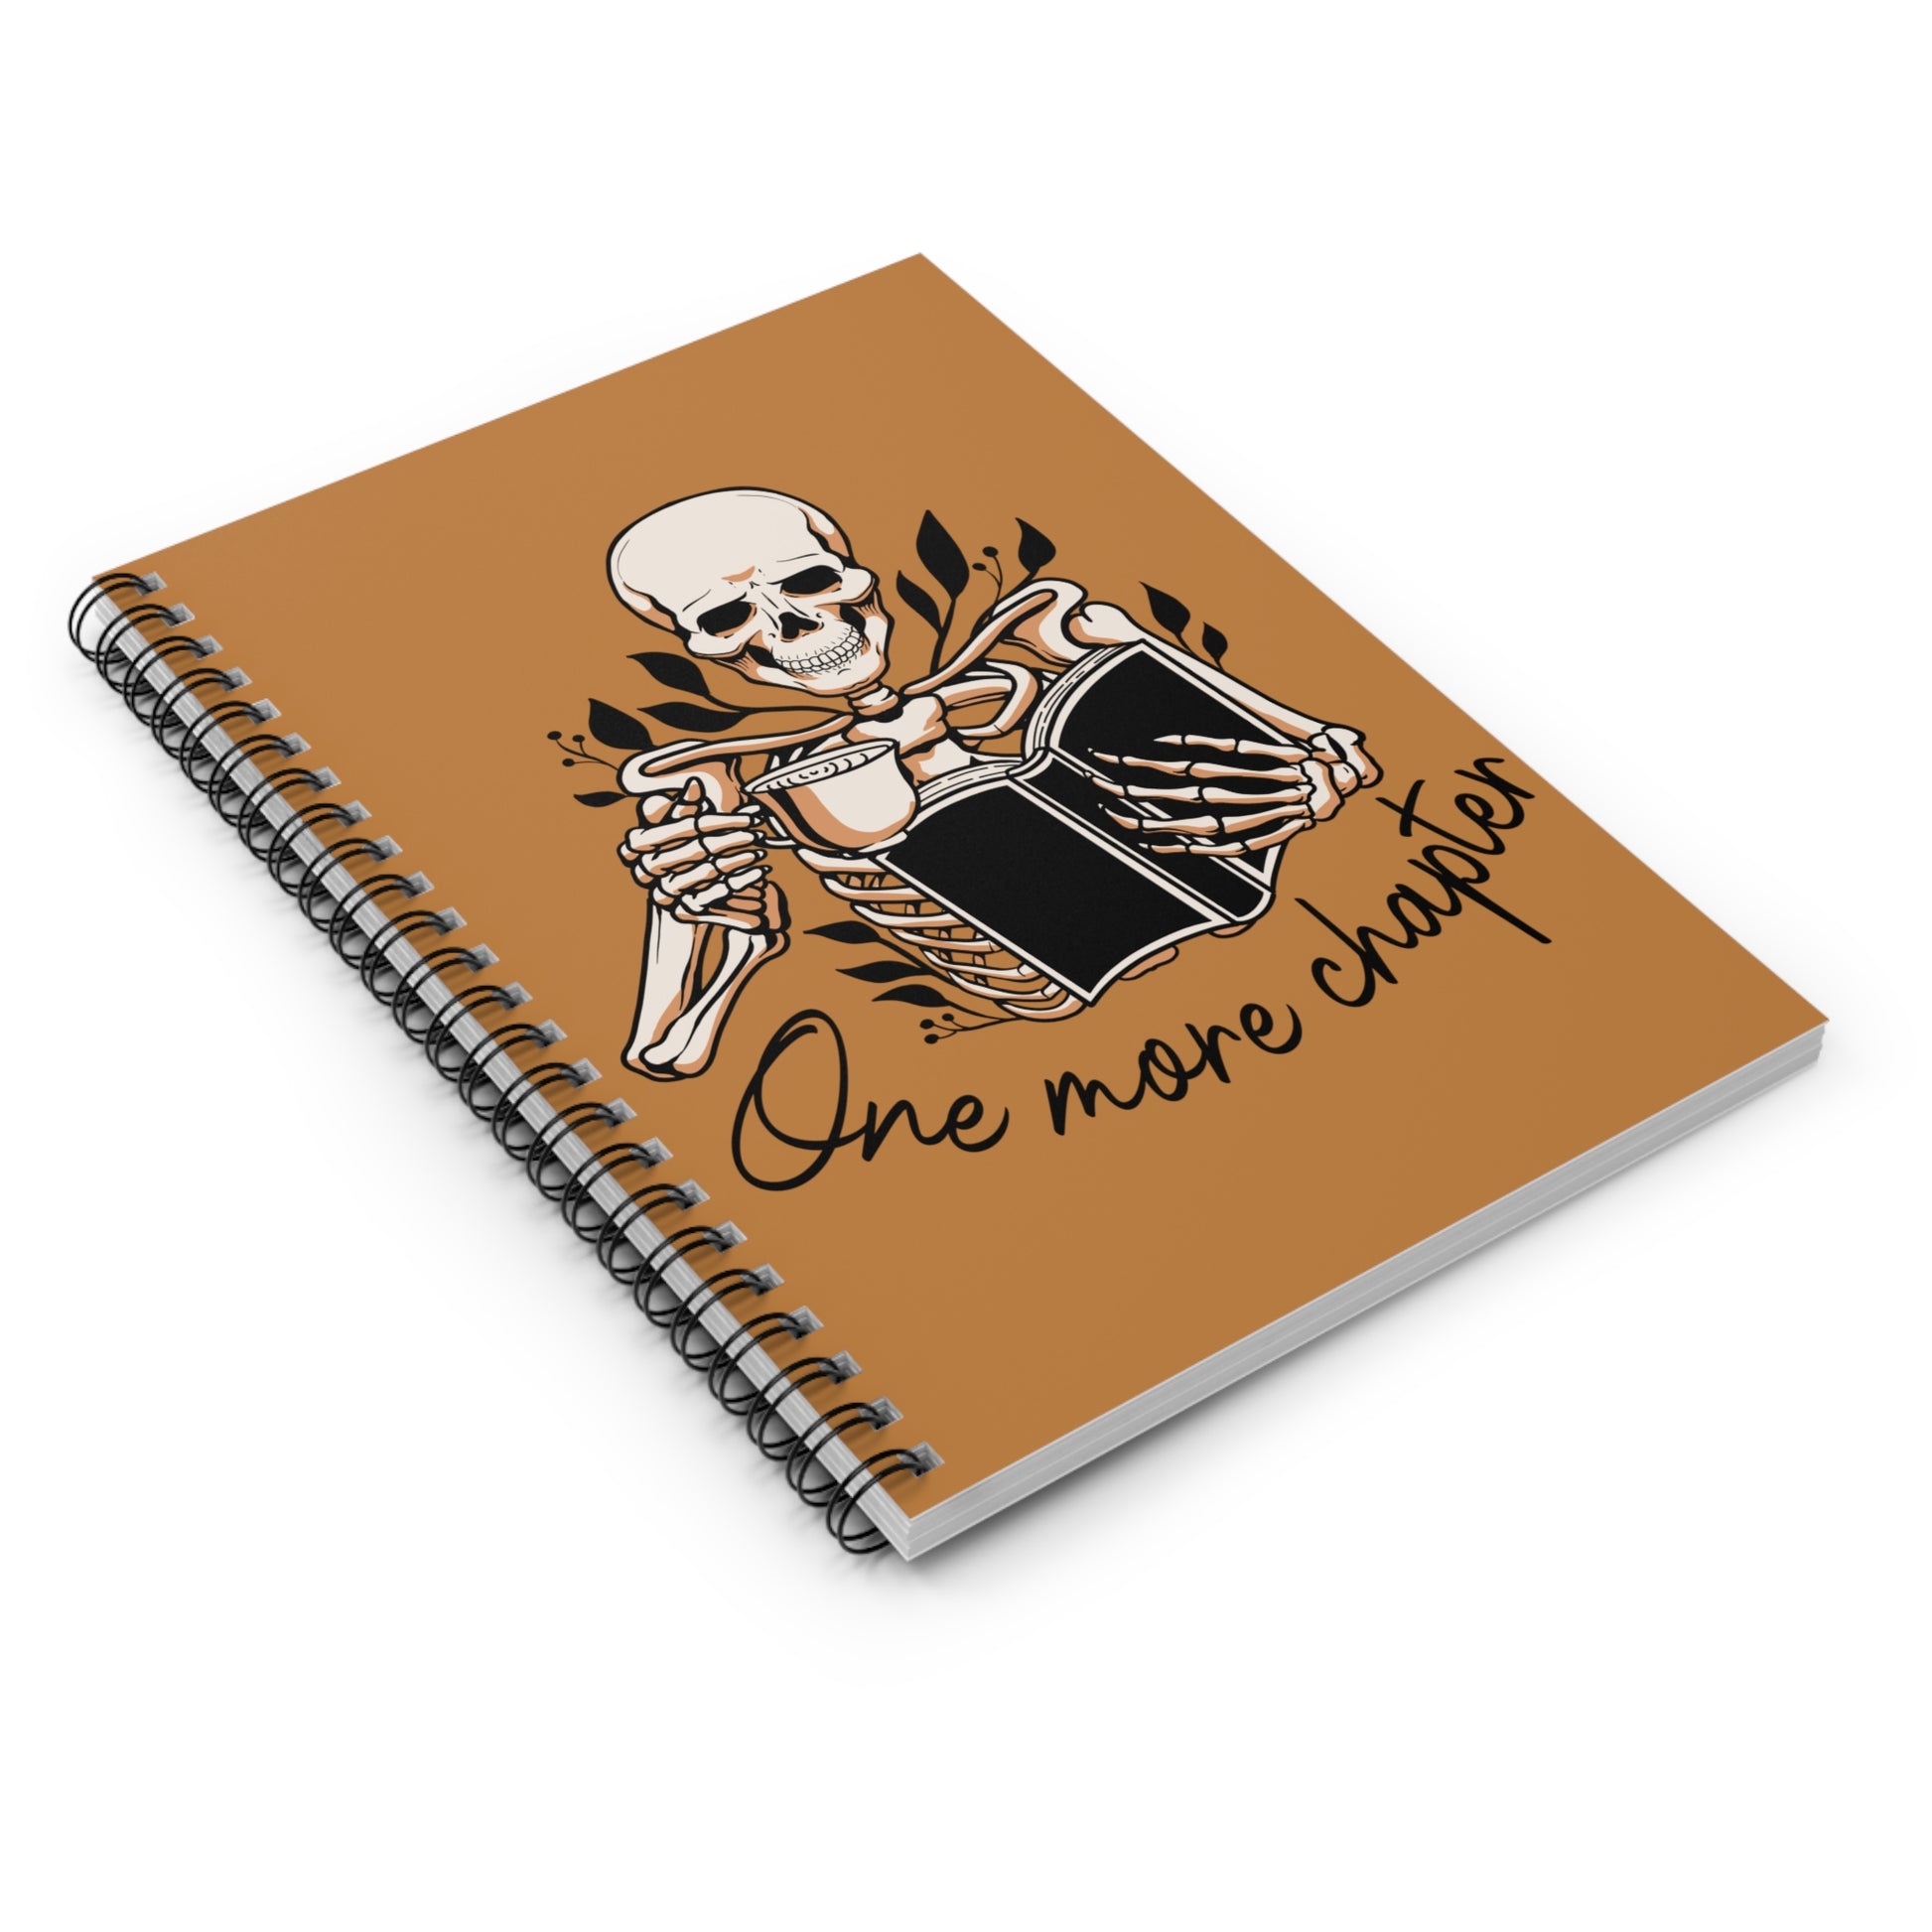 One More Chapter: Spiral Notebook - Log Books - Journals - Diaries - and More Custom Printed by TheGlassyLass